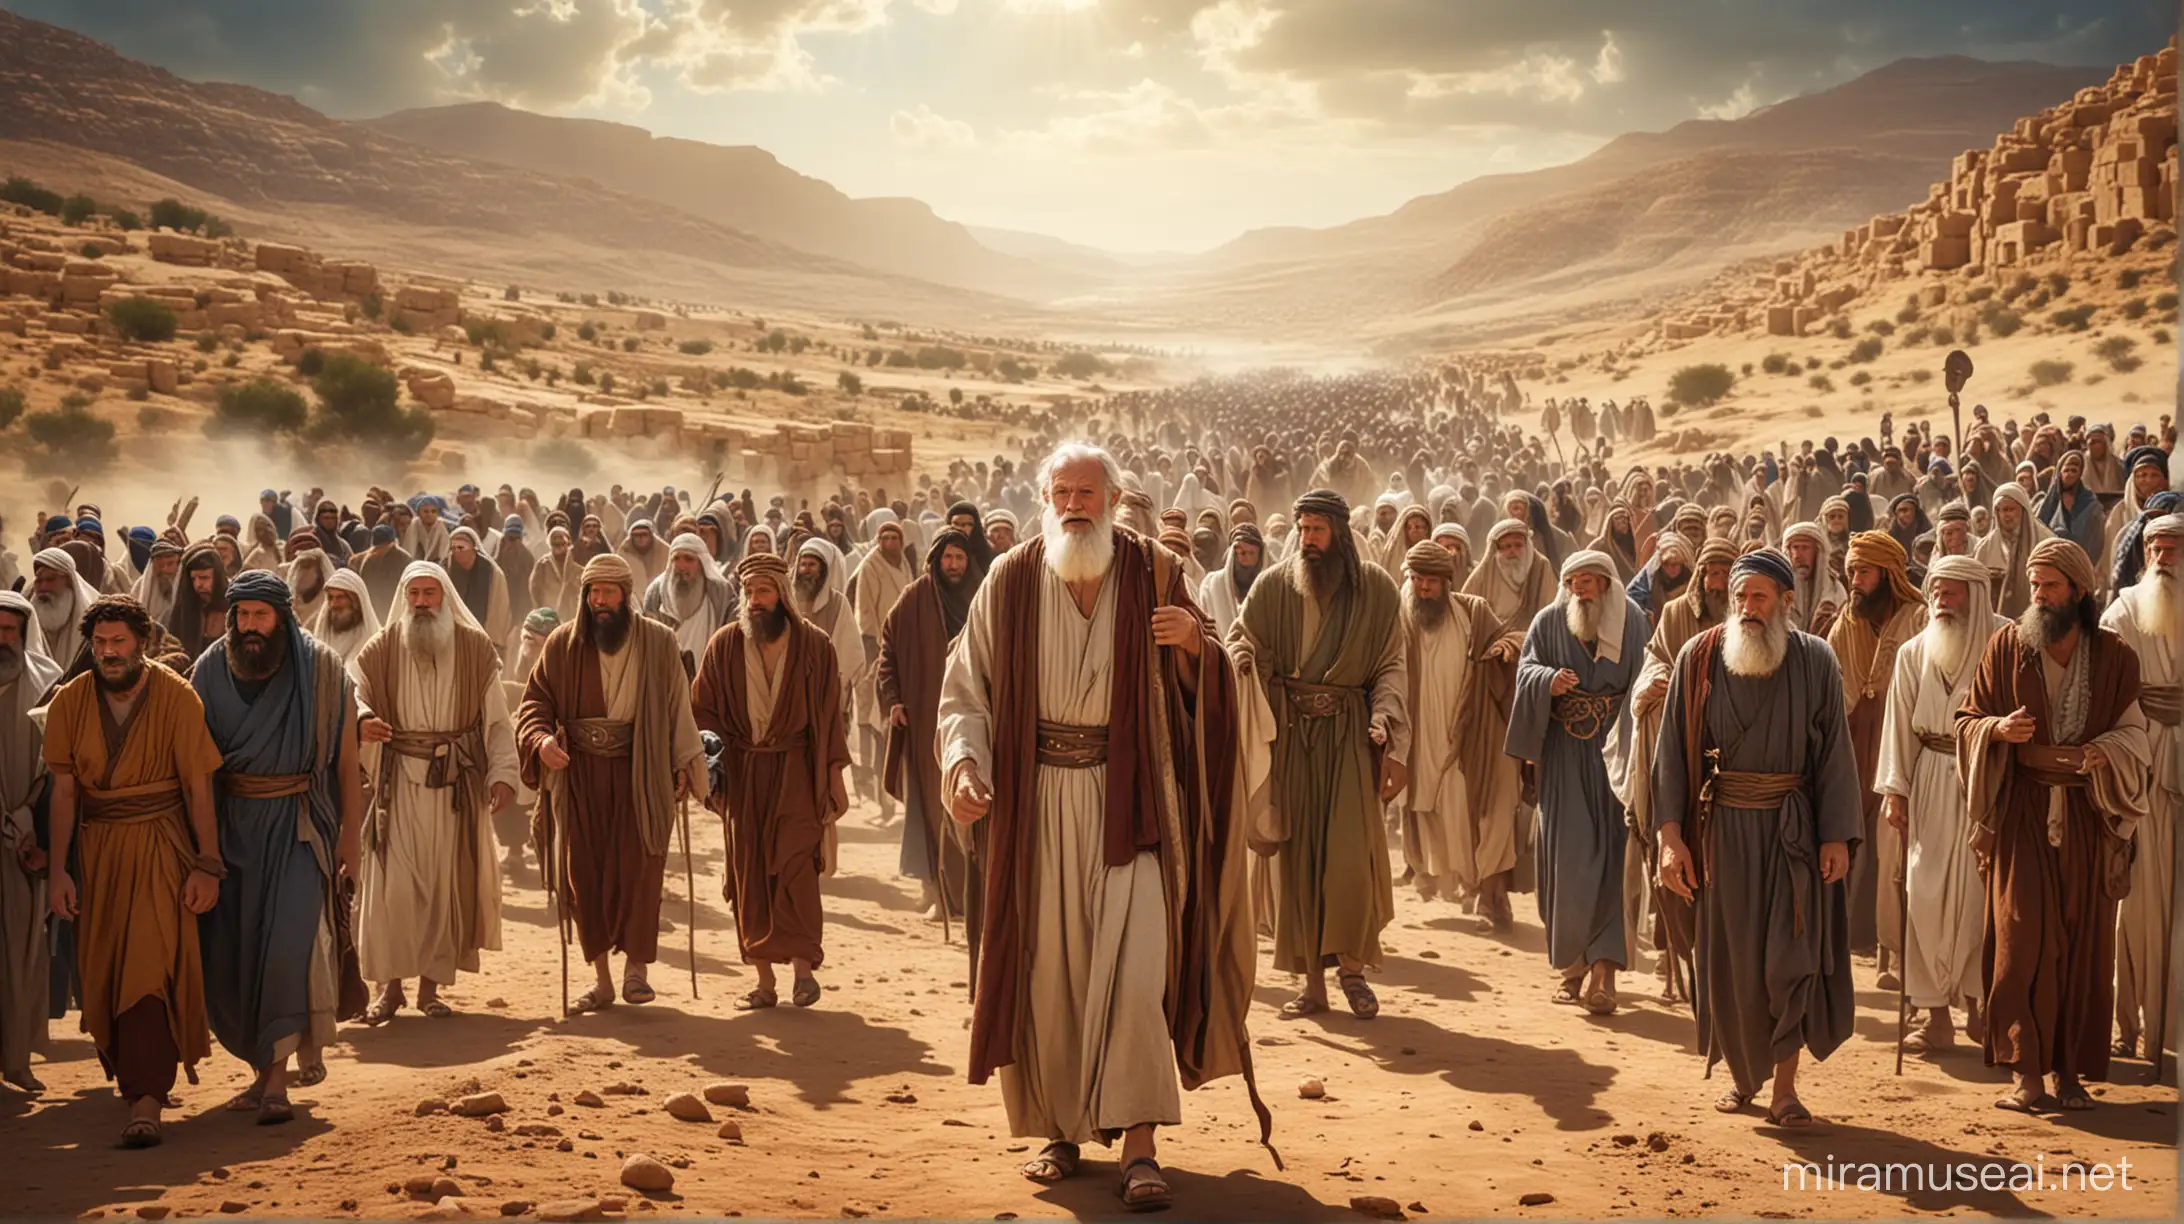 Moses from the bible in the book of Deuteronomy as an old man Leading a multitude of Israelites before they enter into the Promised Land.